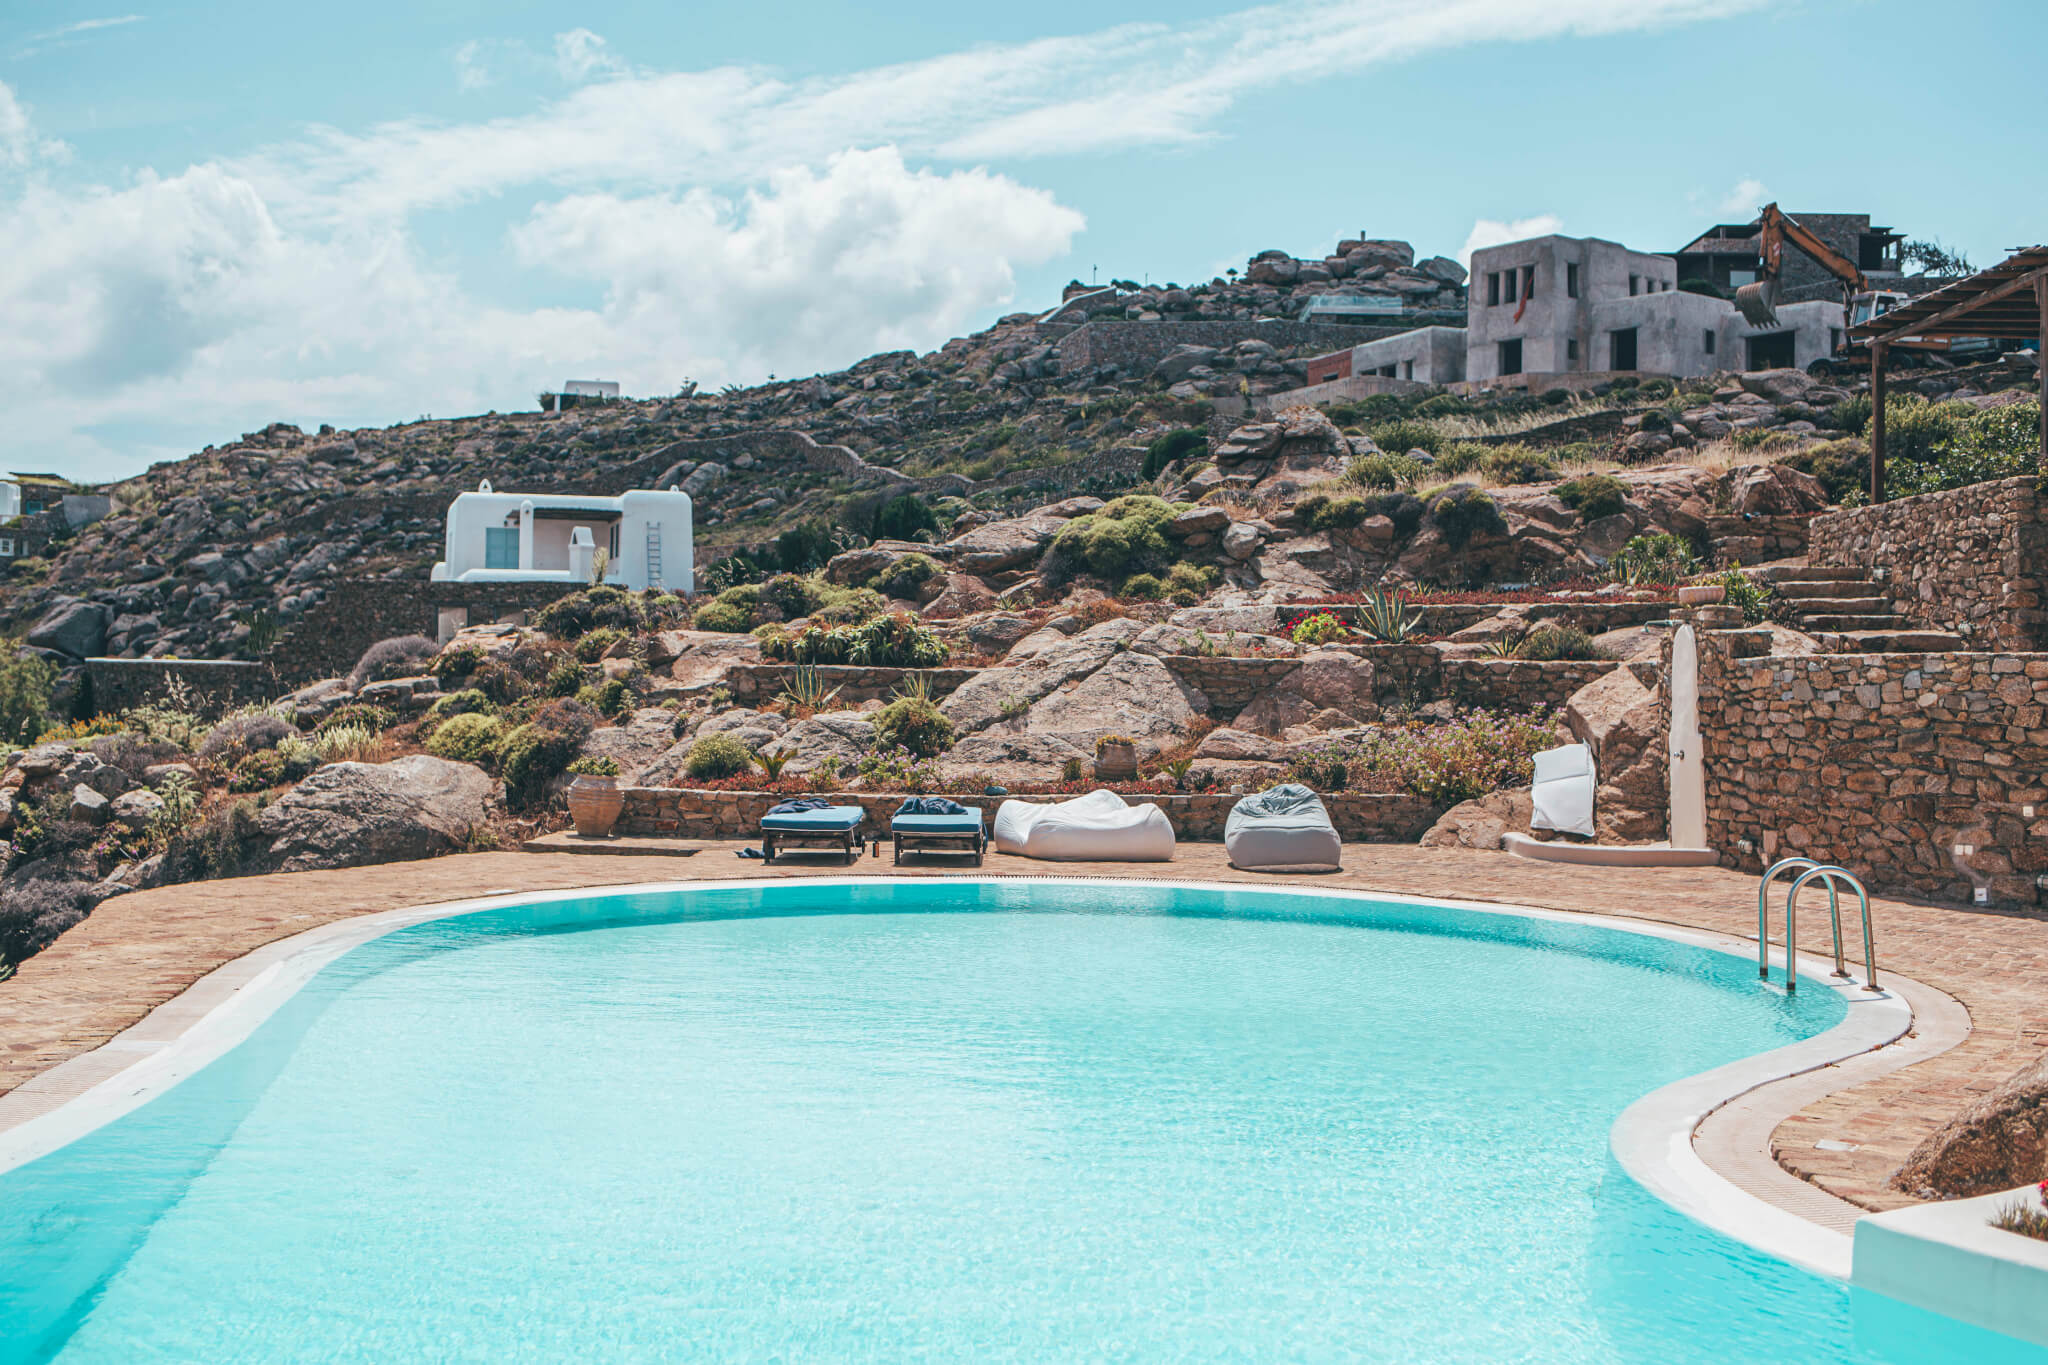 Mykonos luxury mixed with the cosmopolitan feel makes this island hard to miss when hopping around the Aegean Sea